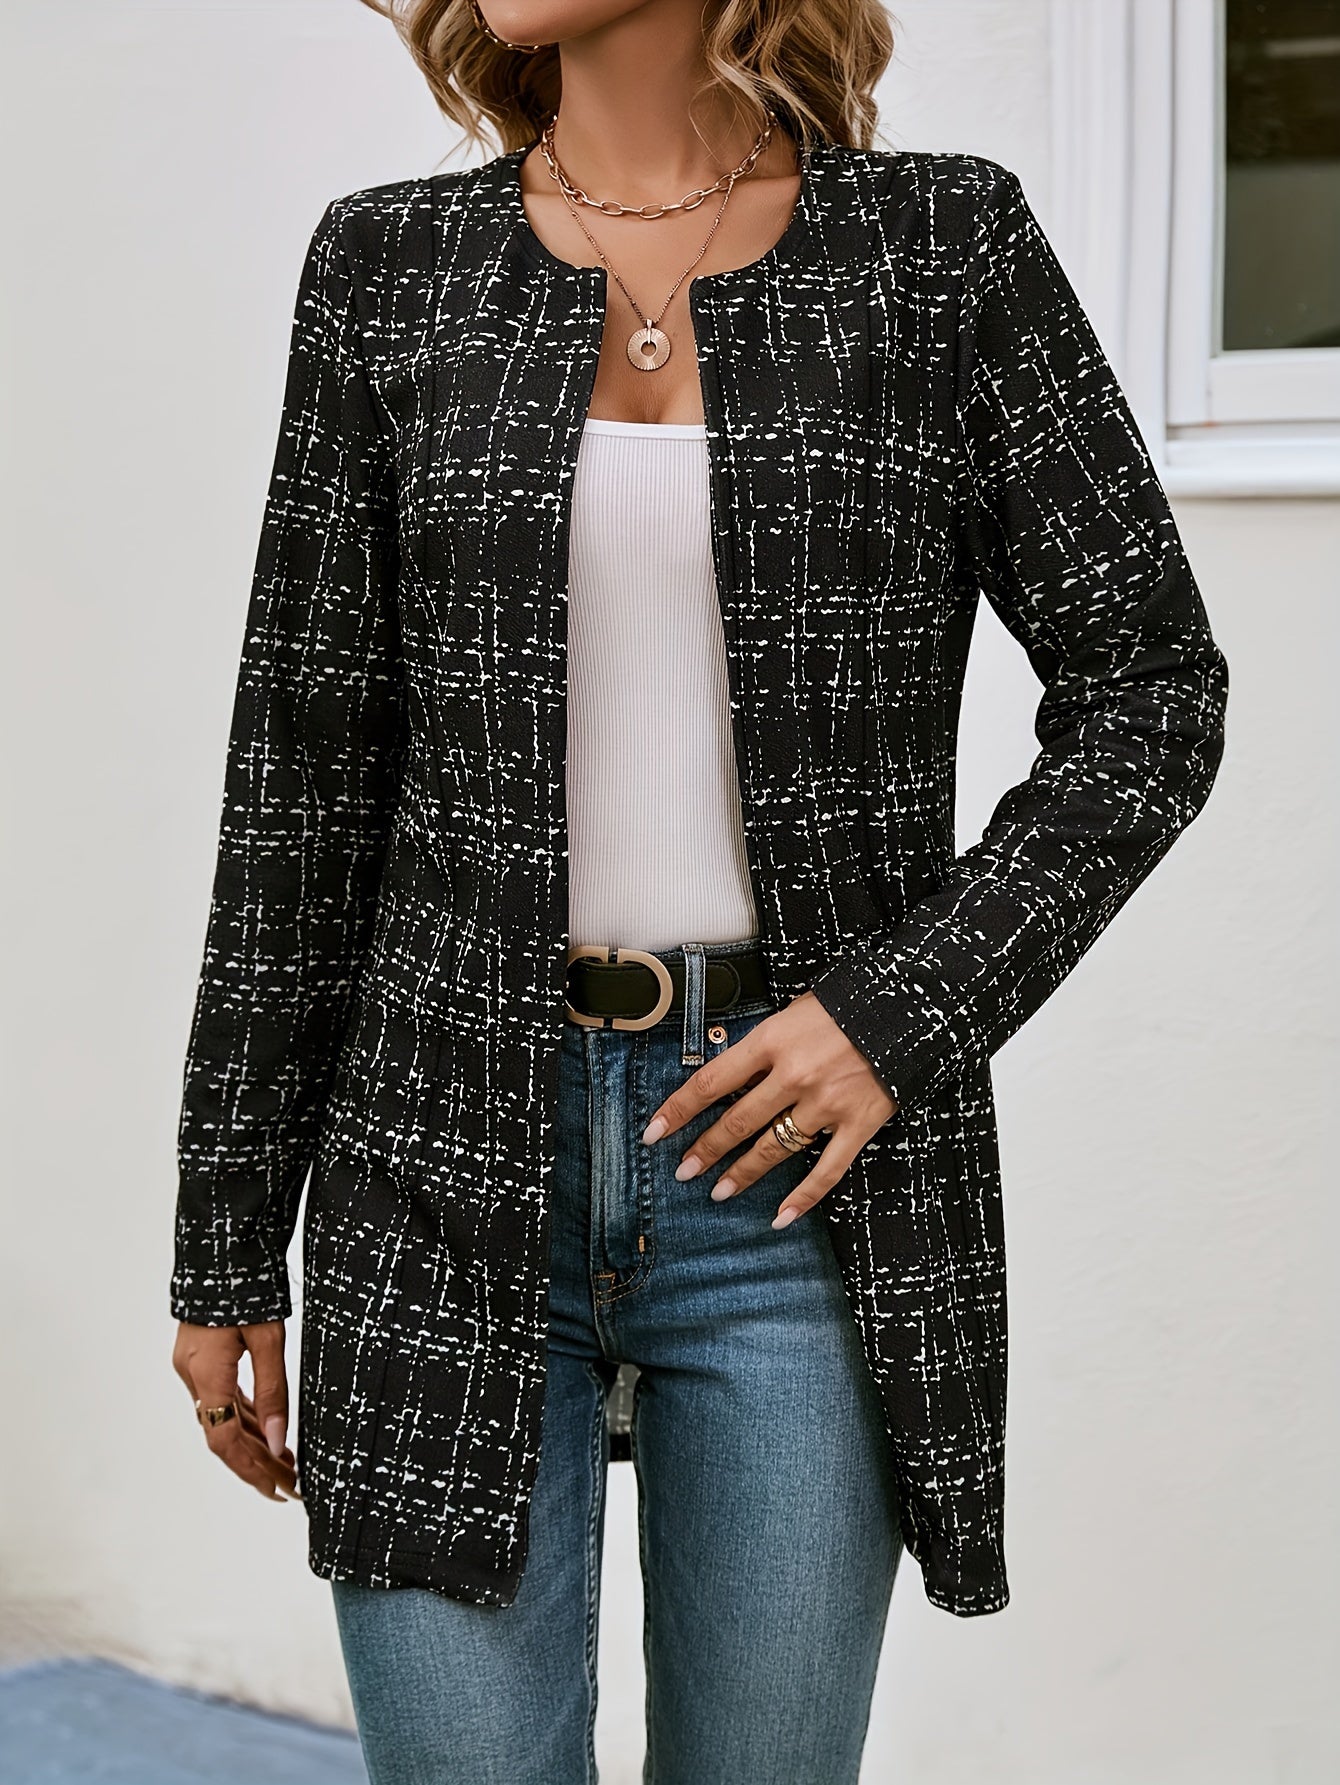 vlovelaw  Plaid Pattern Open Front Jacket, Versatile Long Sleeve Outwear For Spring & Fall, Women's Clothing